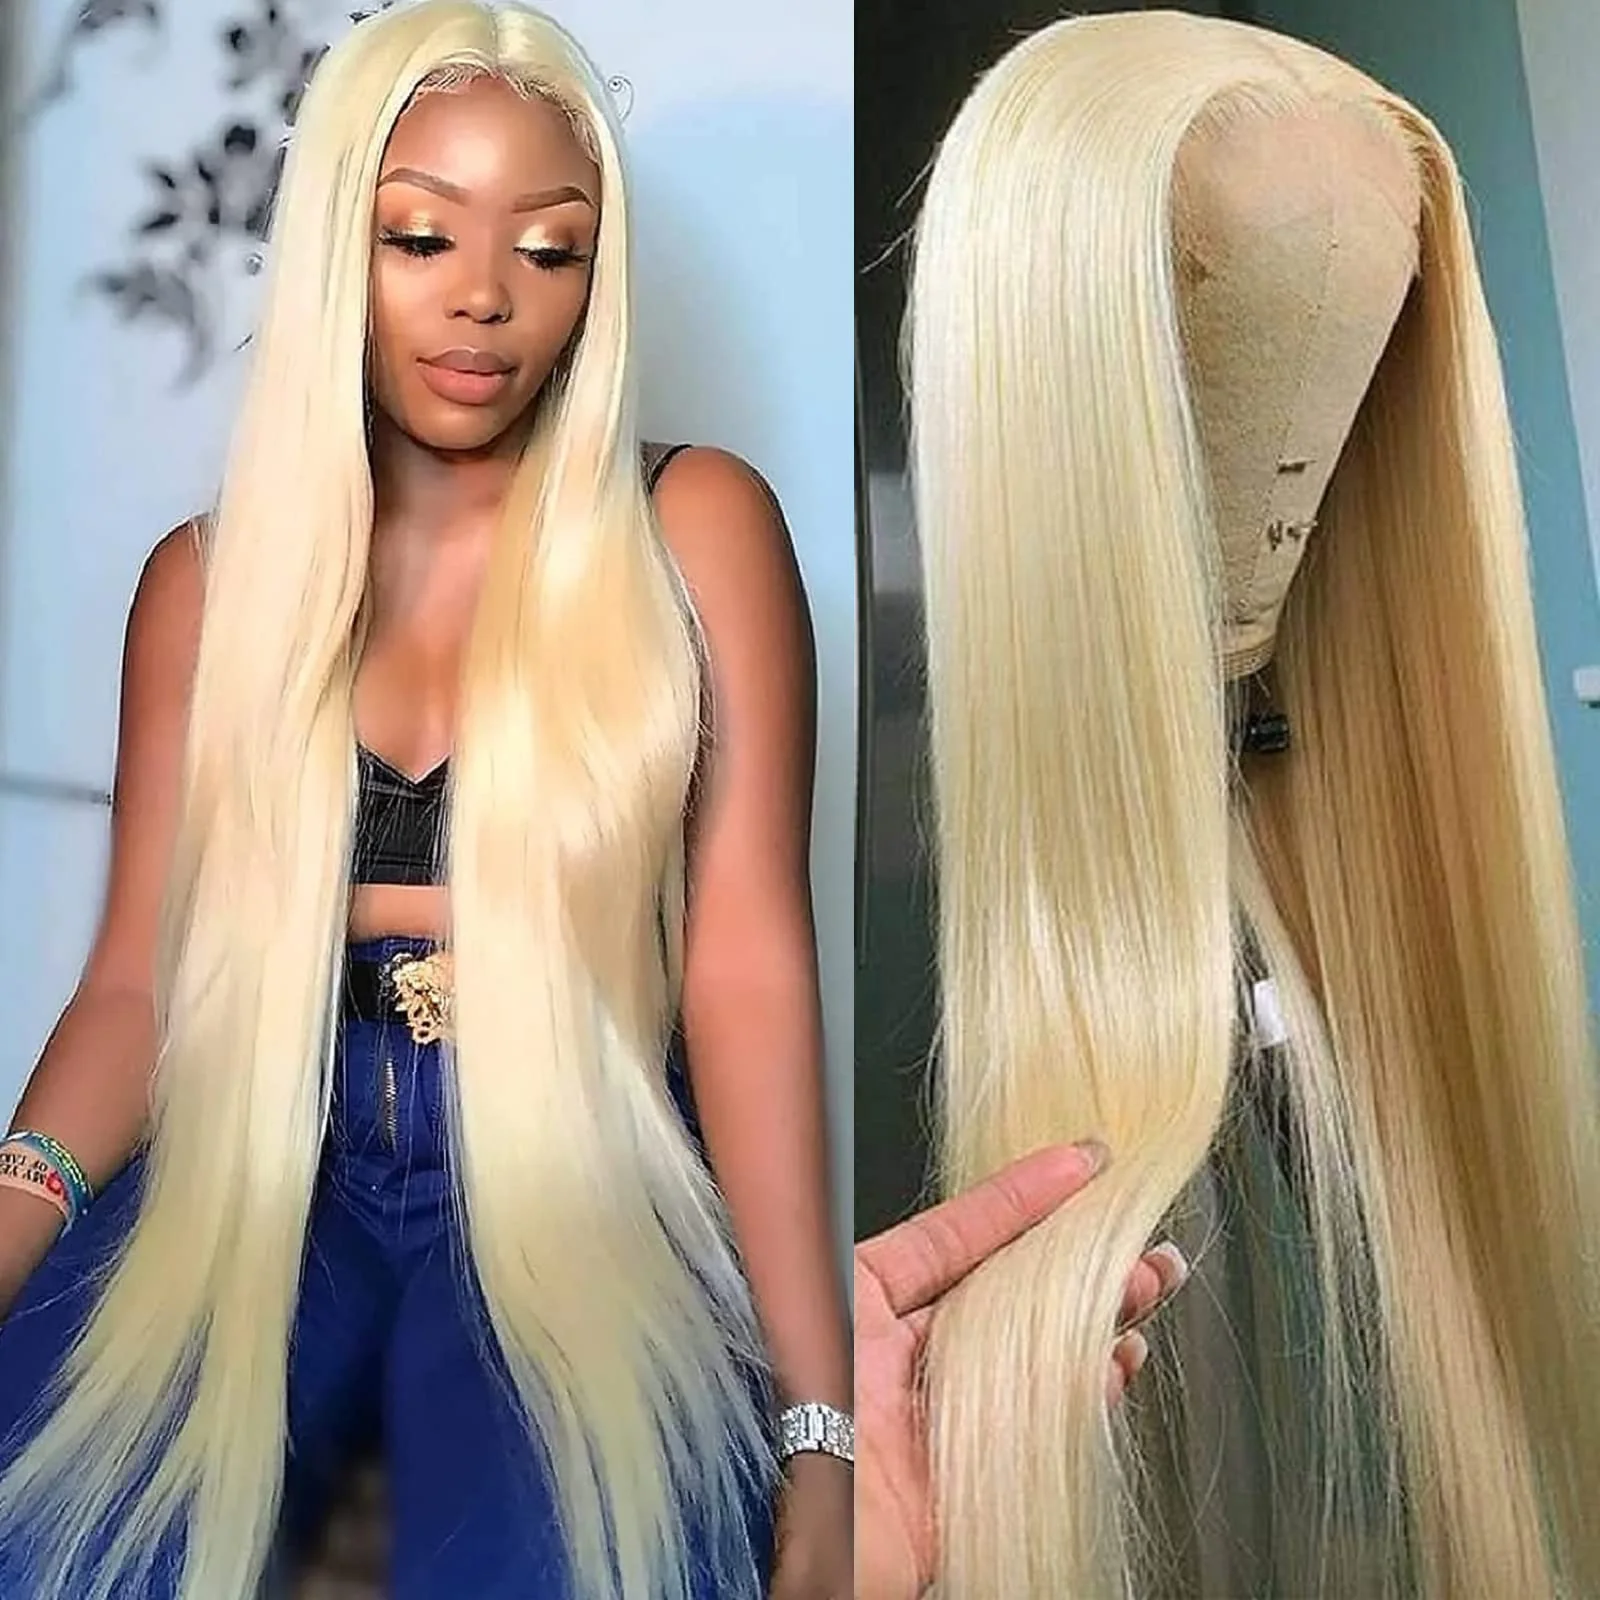 URFIRST 613 Lace Front Wig Human Hair 13×4 Blonde Human Hair Wig 20 Inch Straight Lace Front Wigs Human Hair With Baby Hair